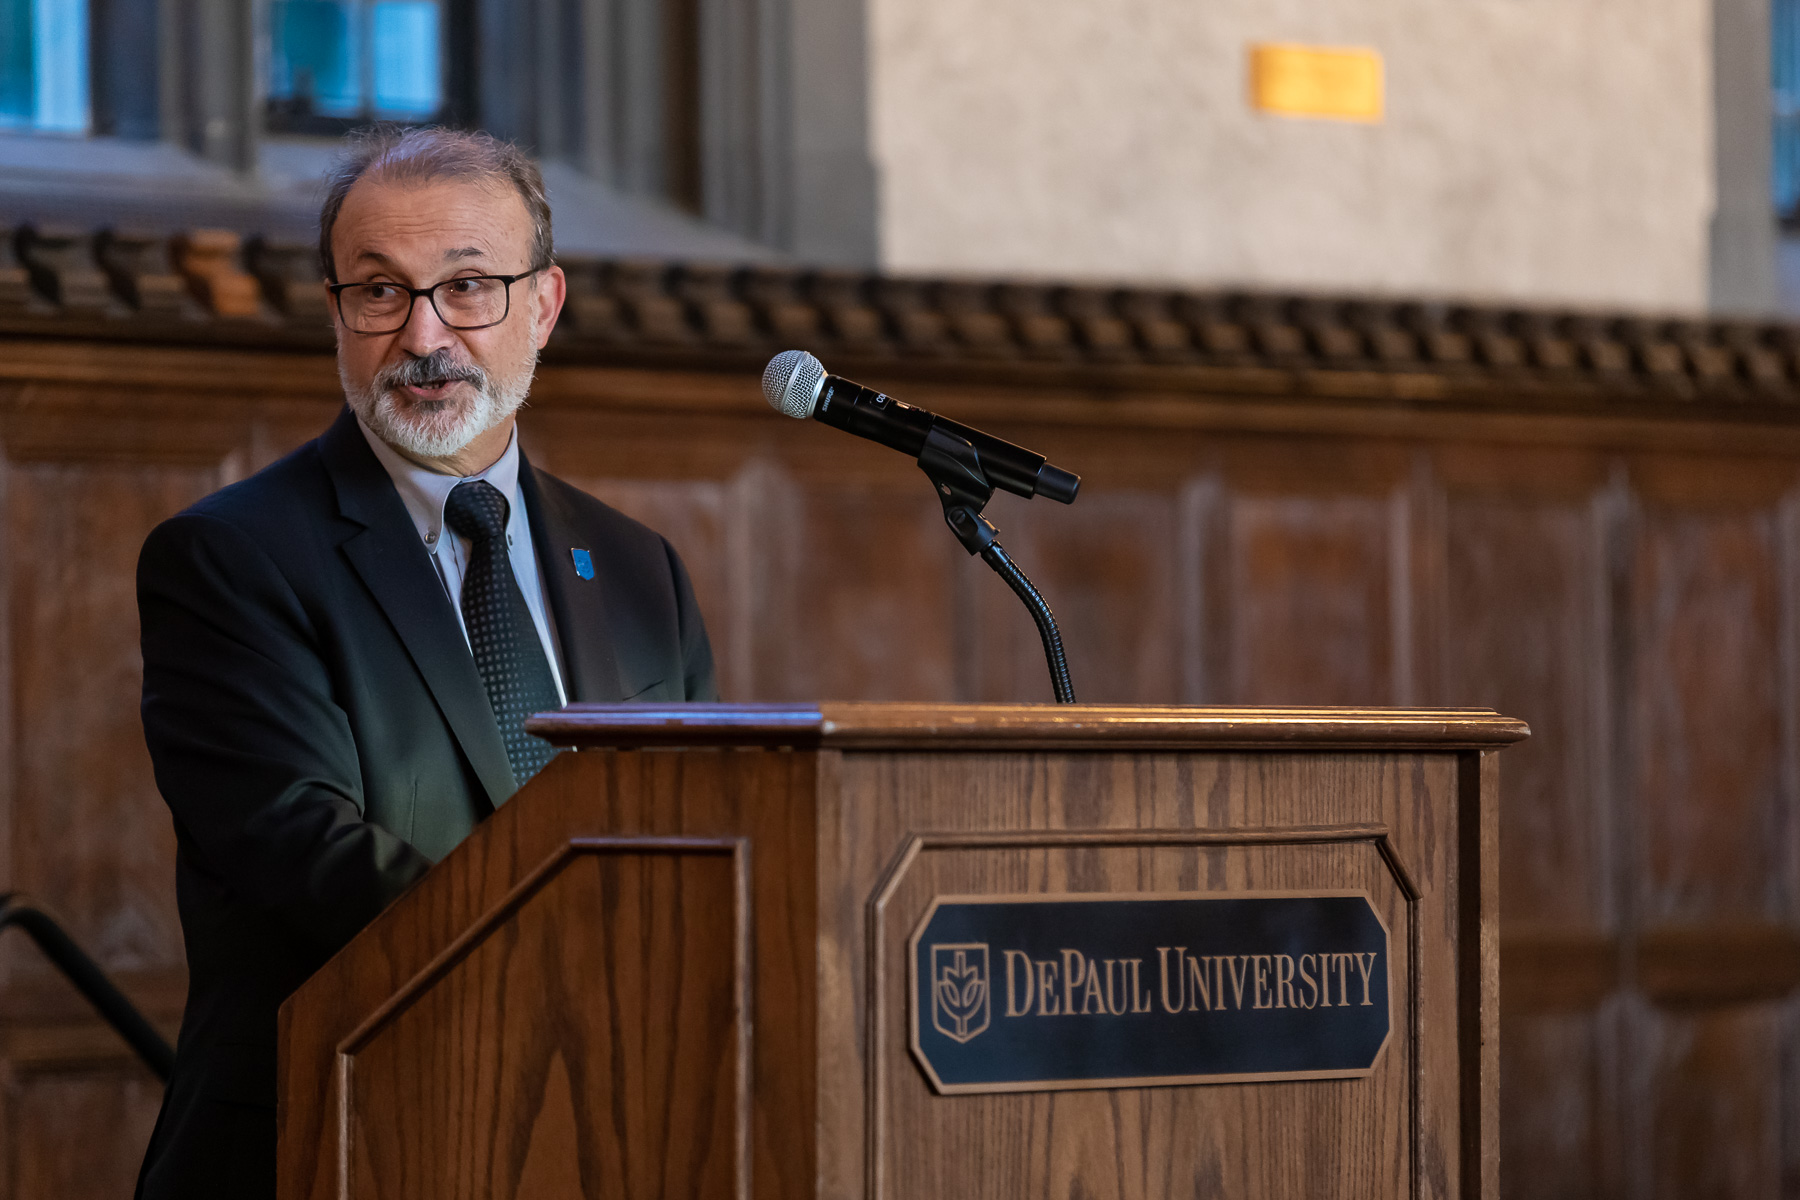 Guillermo Vasquez de Velasco, dean of the College of Liberal Arts and Social Sciences, speaks at the investiture ceremony.